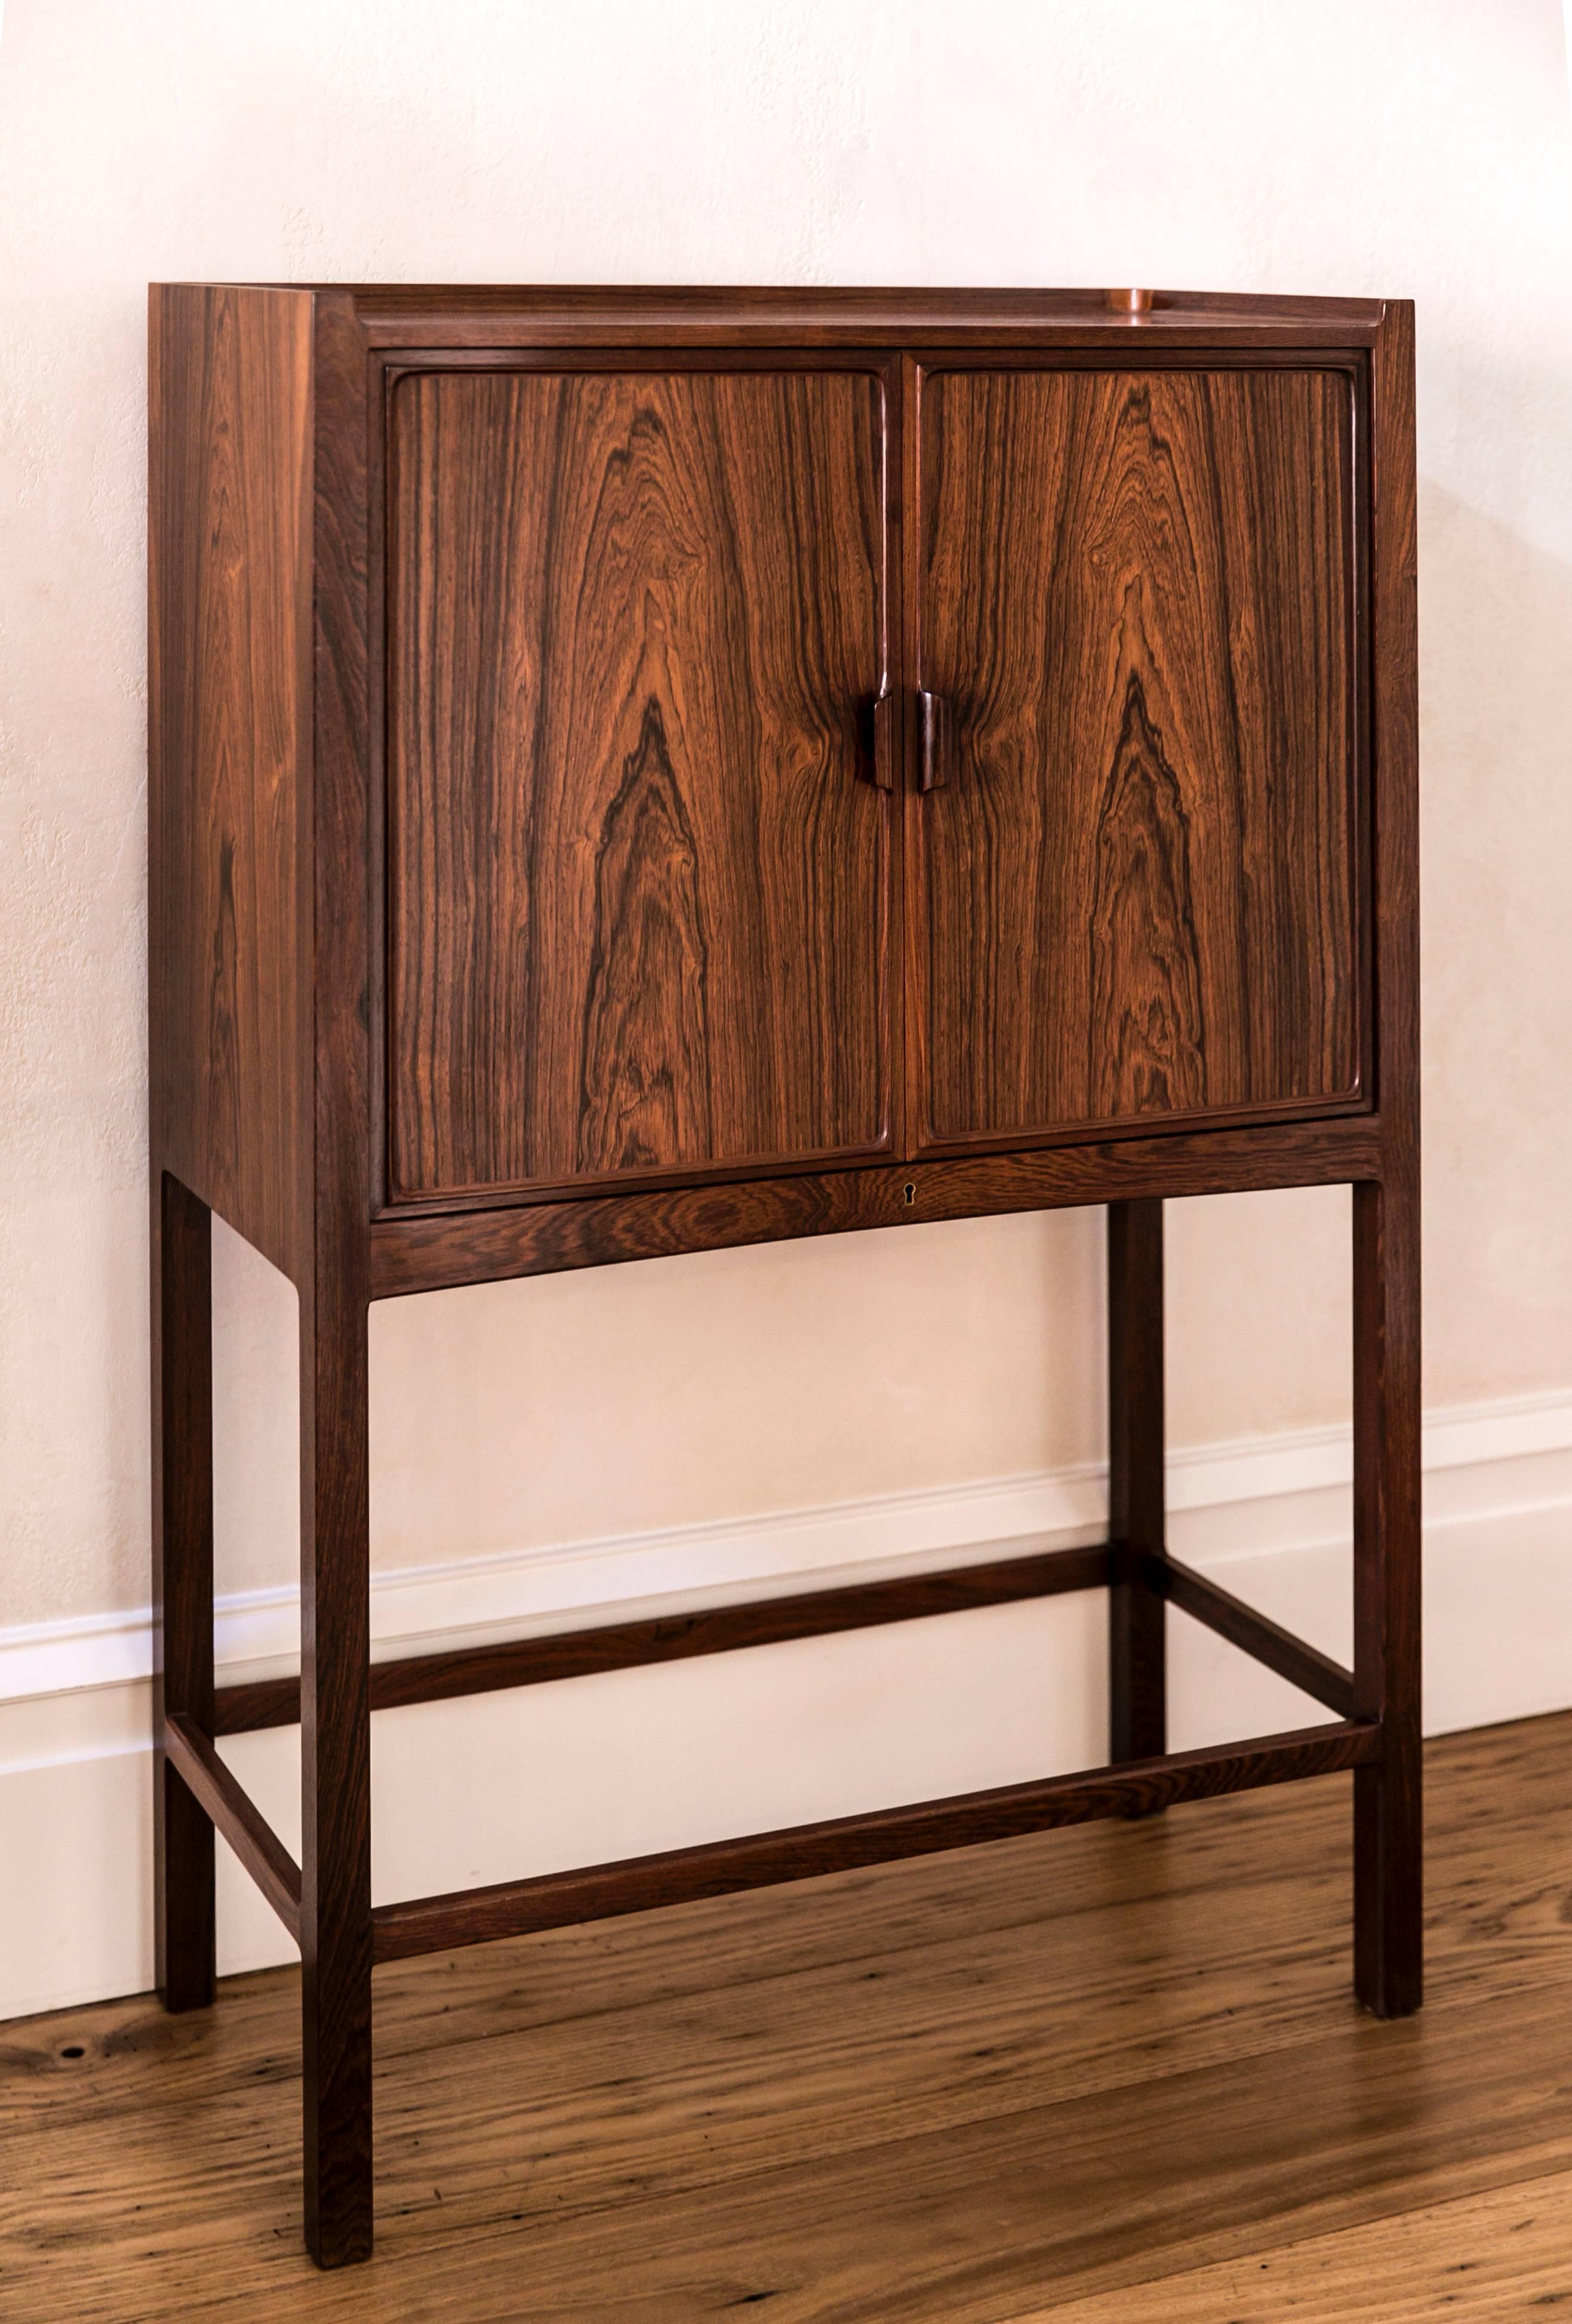 Offerd by Vance Trimble, Small Freestanding Cabinet with Cedar Wood Interior by Ludvig Pontoppidan. This small and beautiful cabinet was designed and made by Danish designer and master cabinetmaker, Ludvig Pontoppidan. The exterior is of